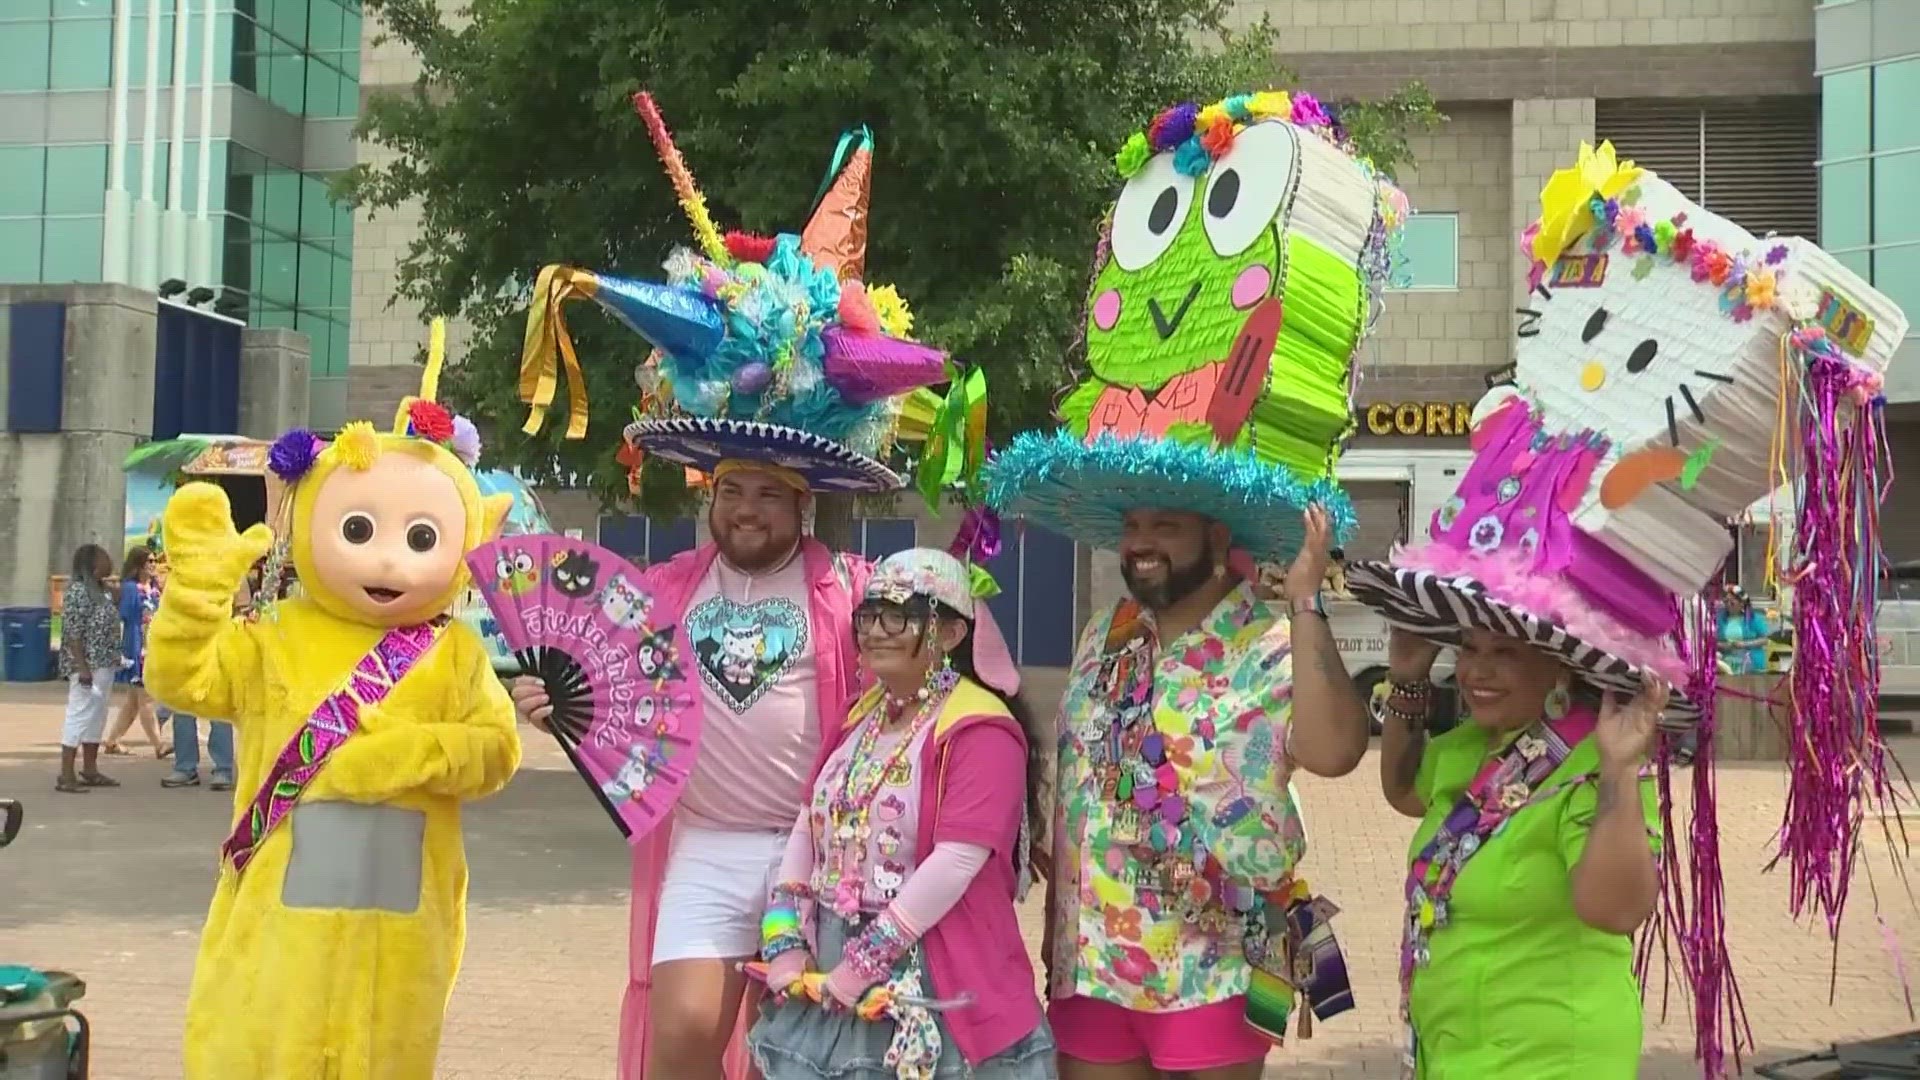 The clink-clink of medals accompanied the oohs and ahhs of showstopping outfits at Fiesta Fiesta on Thursday.